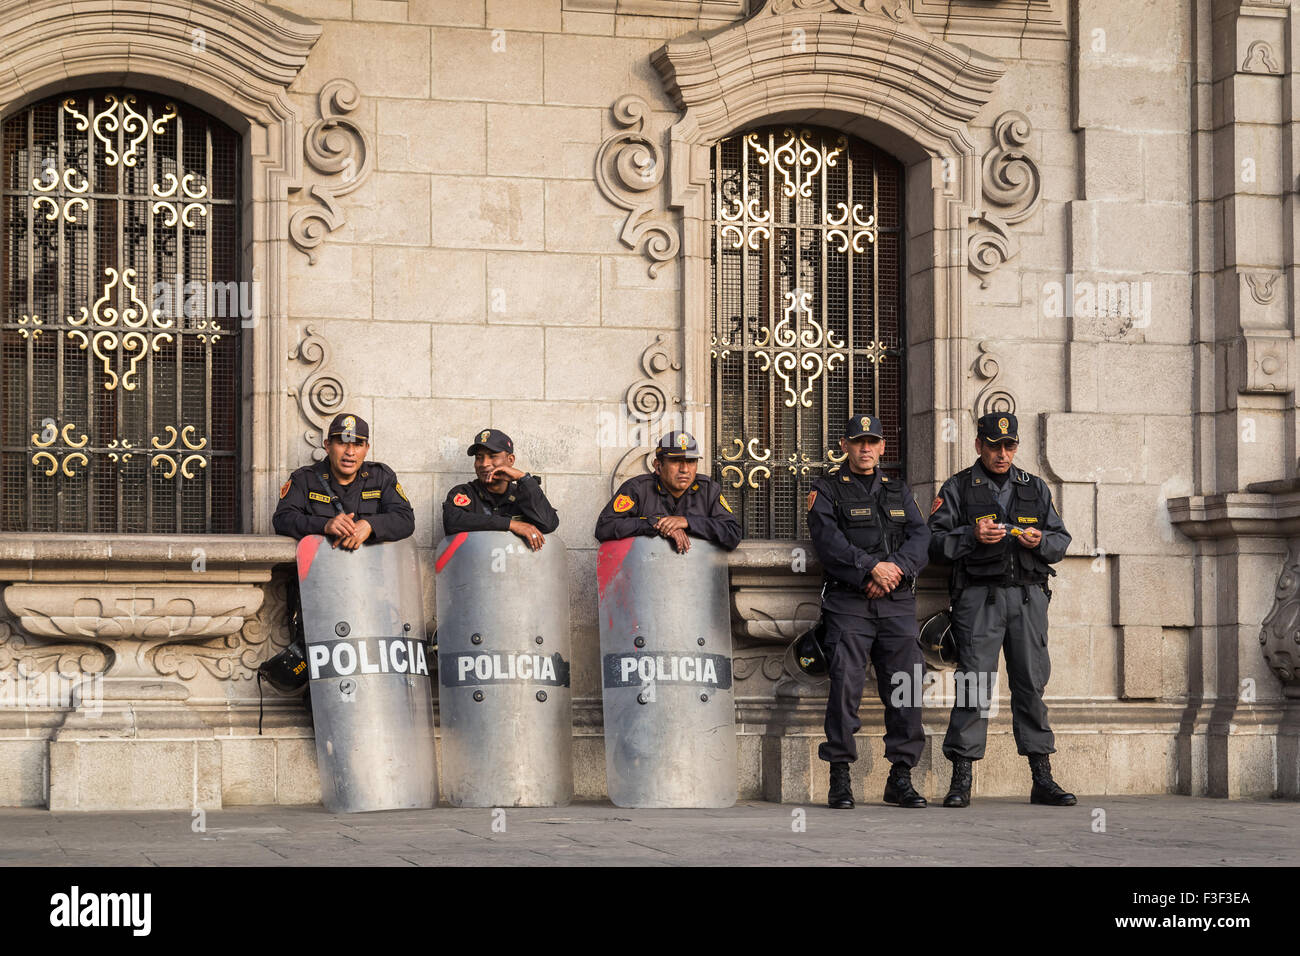 Lima, Peru - September 05, 2015: Five policemen are guarding the central square in front of the government palace on a Saturday Stock Photo